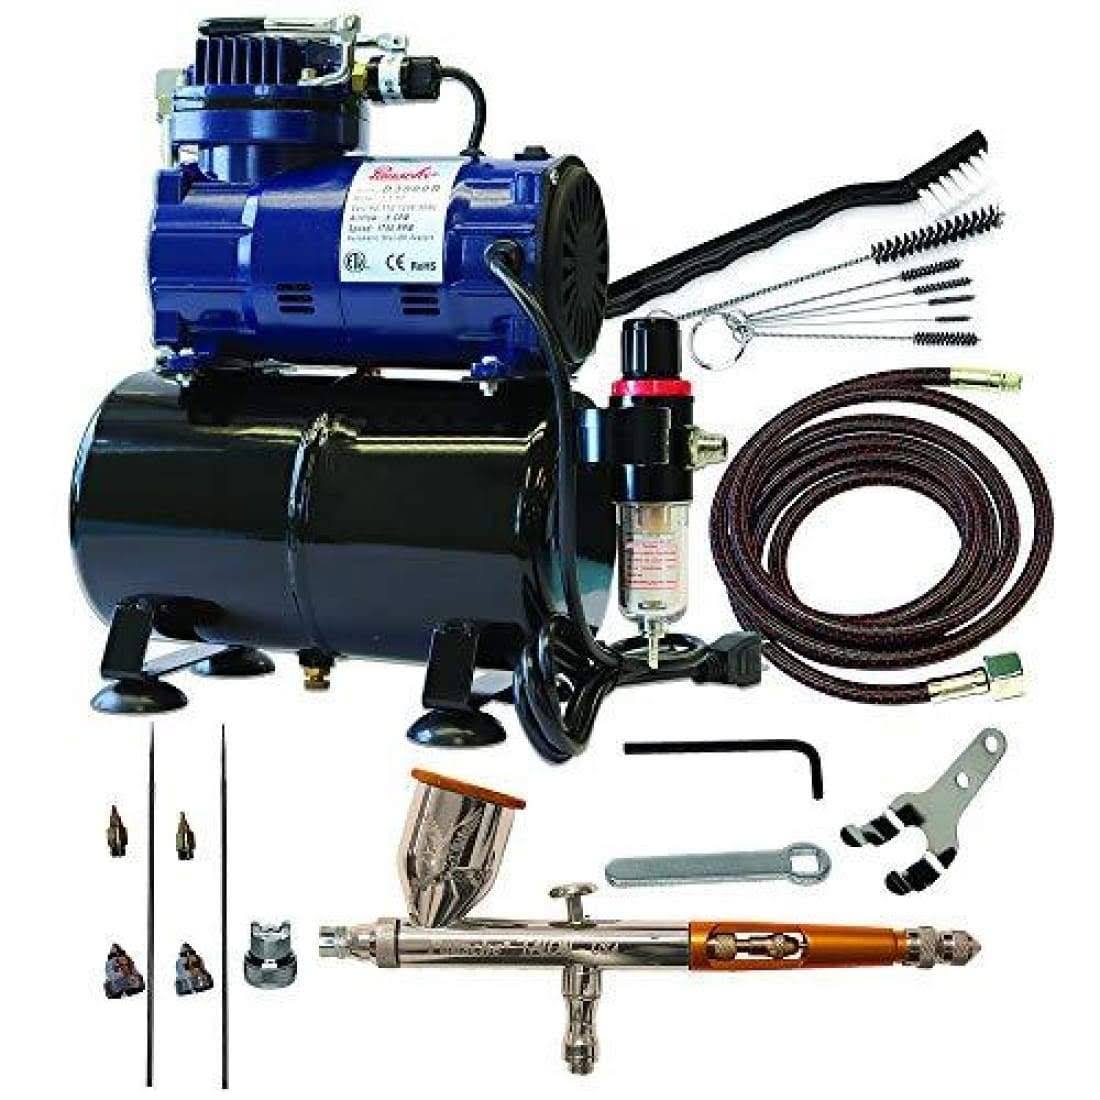 Paasche Airbrush TG-300R Double Action Gravity Feed Airbrush Set and Compressor with Tank, None